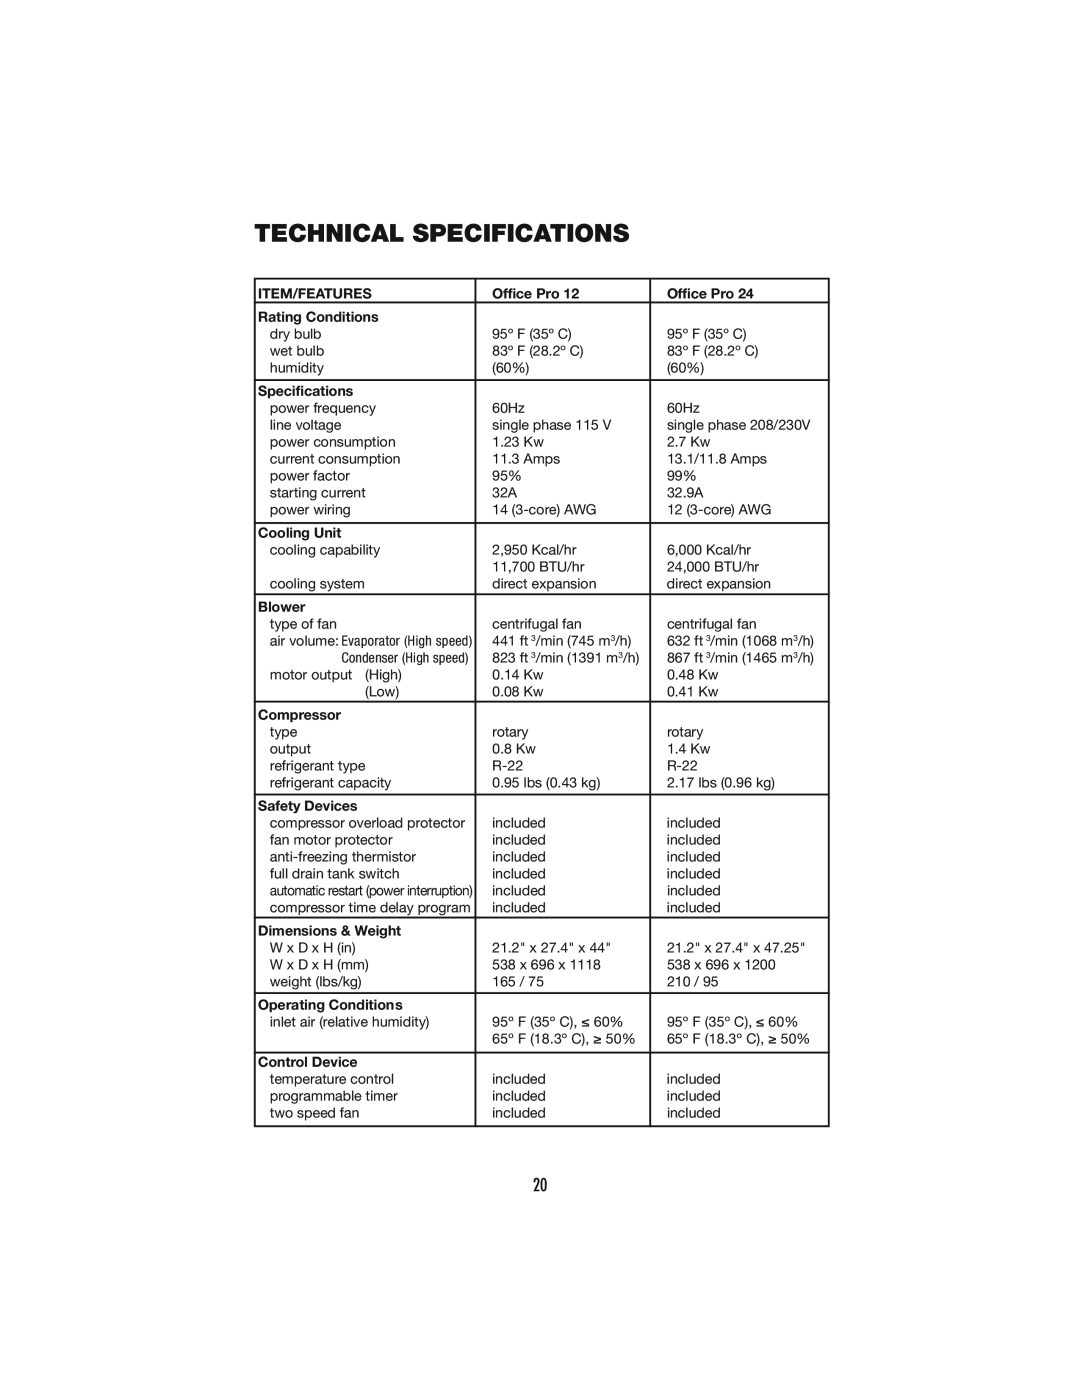 Denso OFFICE PRO 12, OFFICE PRO 24 operation manual Technical Specifications 